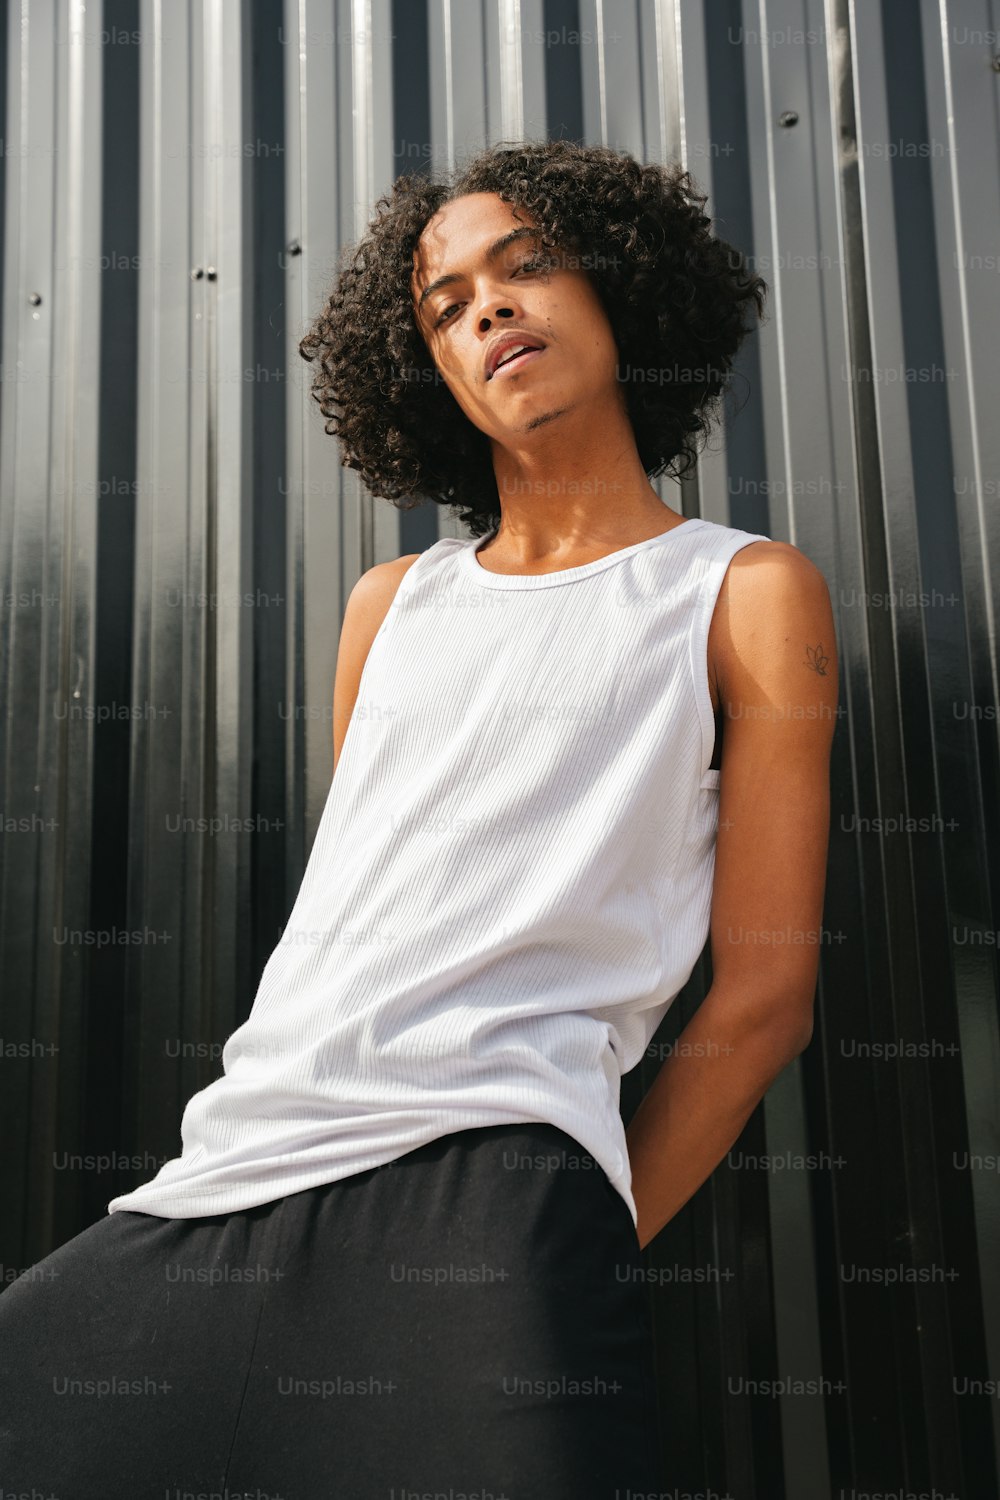 a woman leaning against a metal wall wearing a white tank top